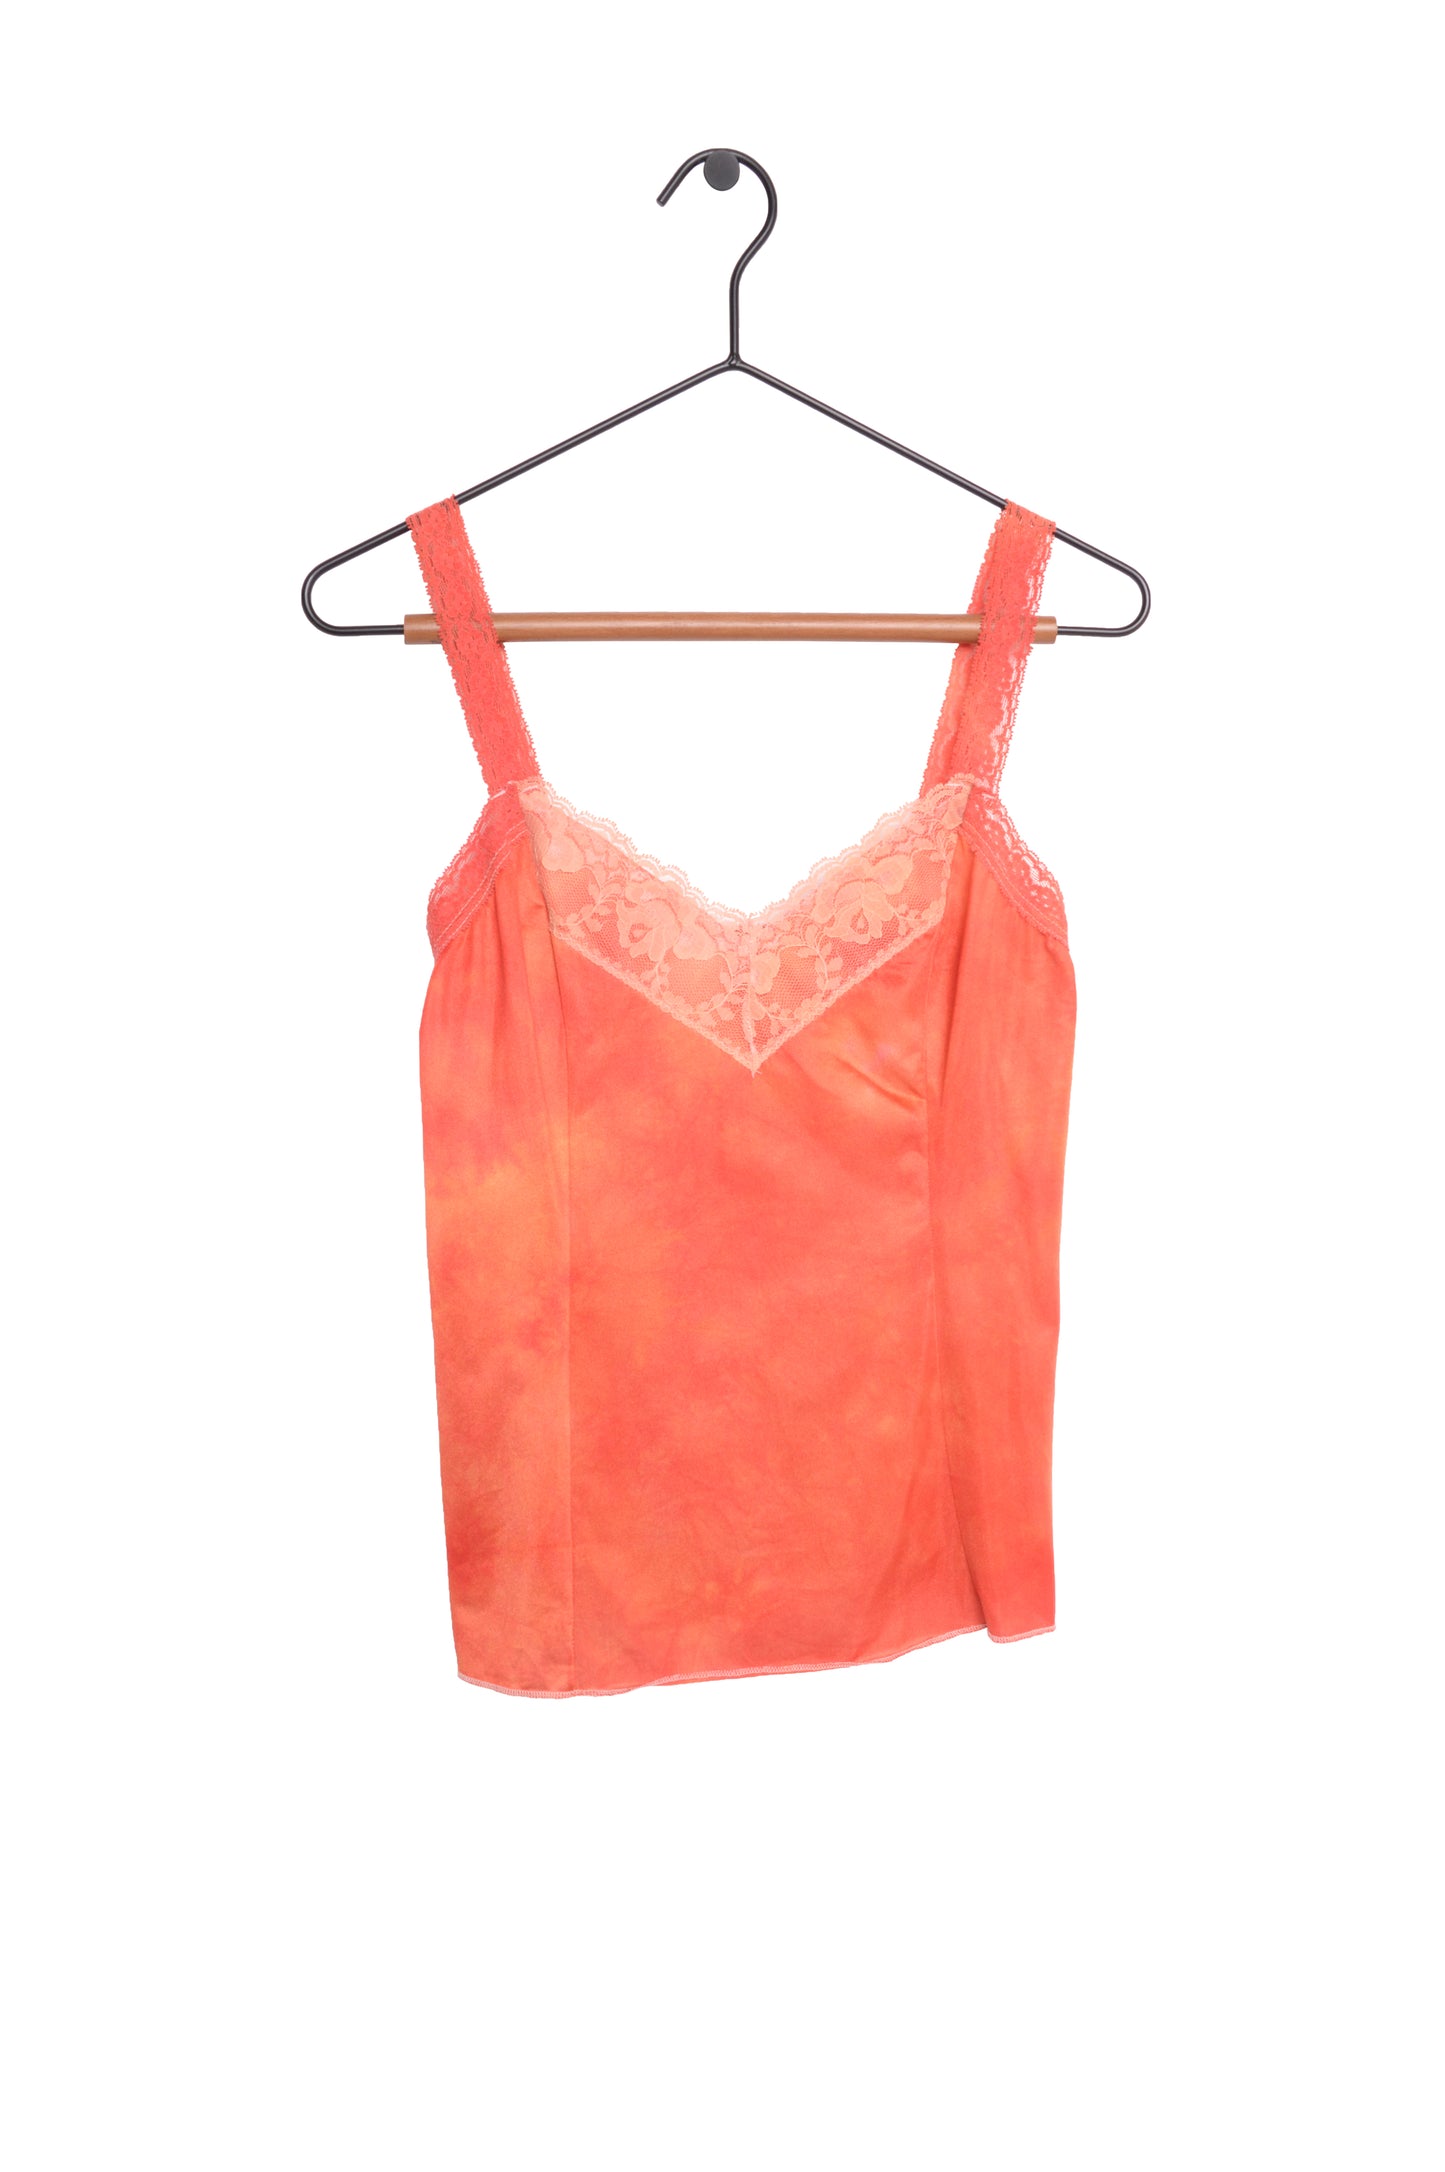 1950s Hand-Dyed Slip Top USA